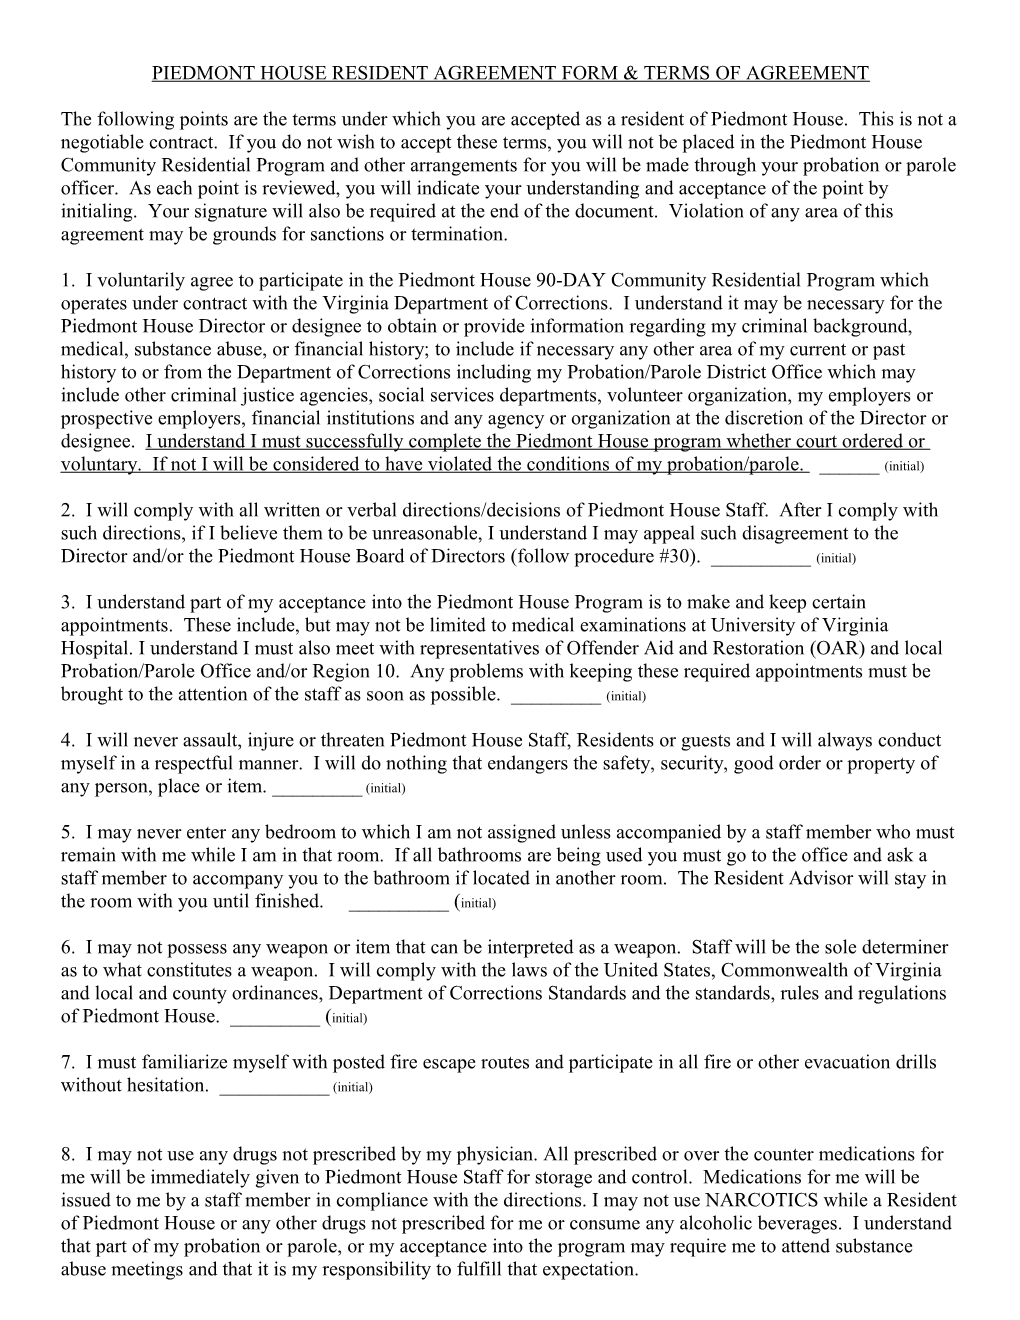 Piedmont House Resident Agreement Form & Terms of Agreement